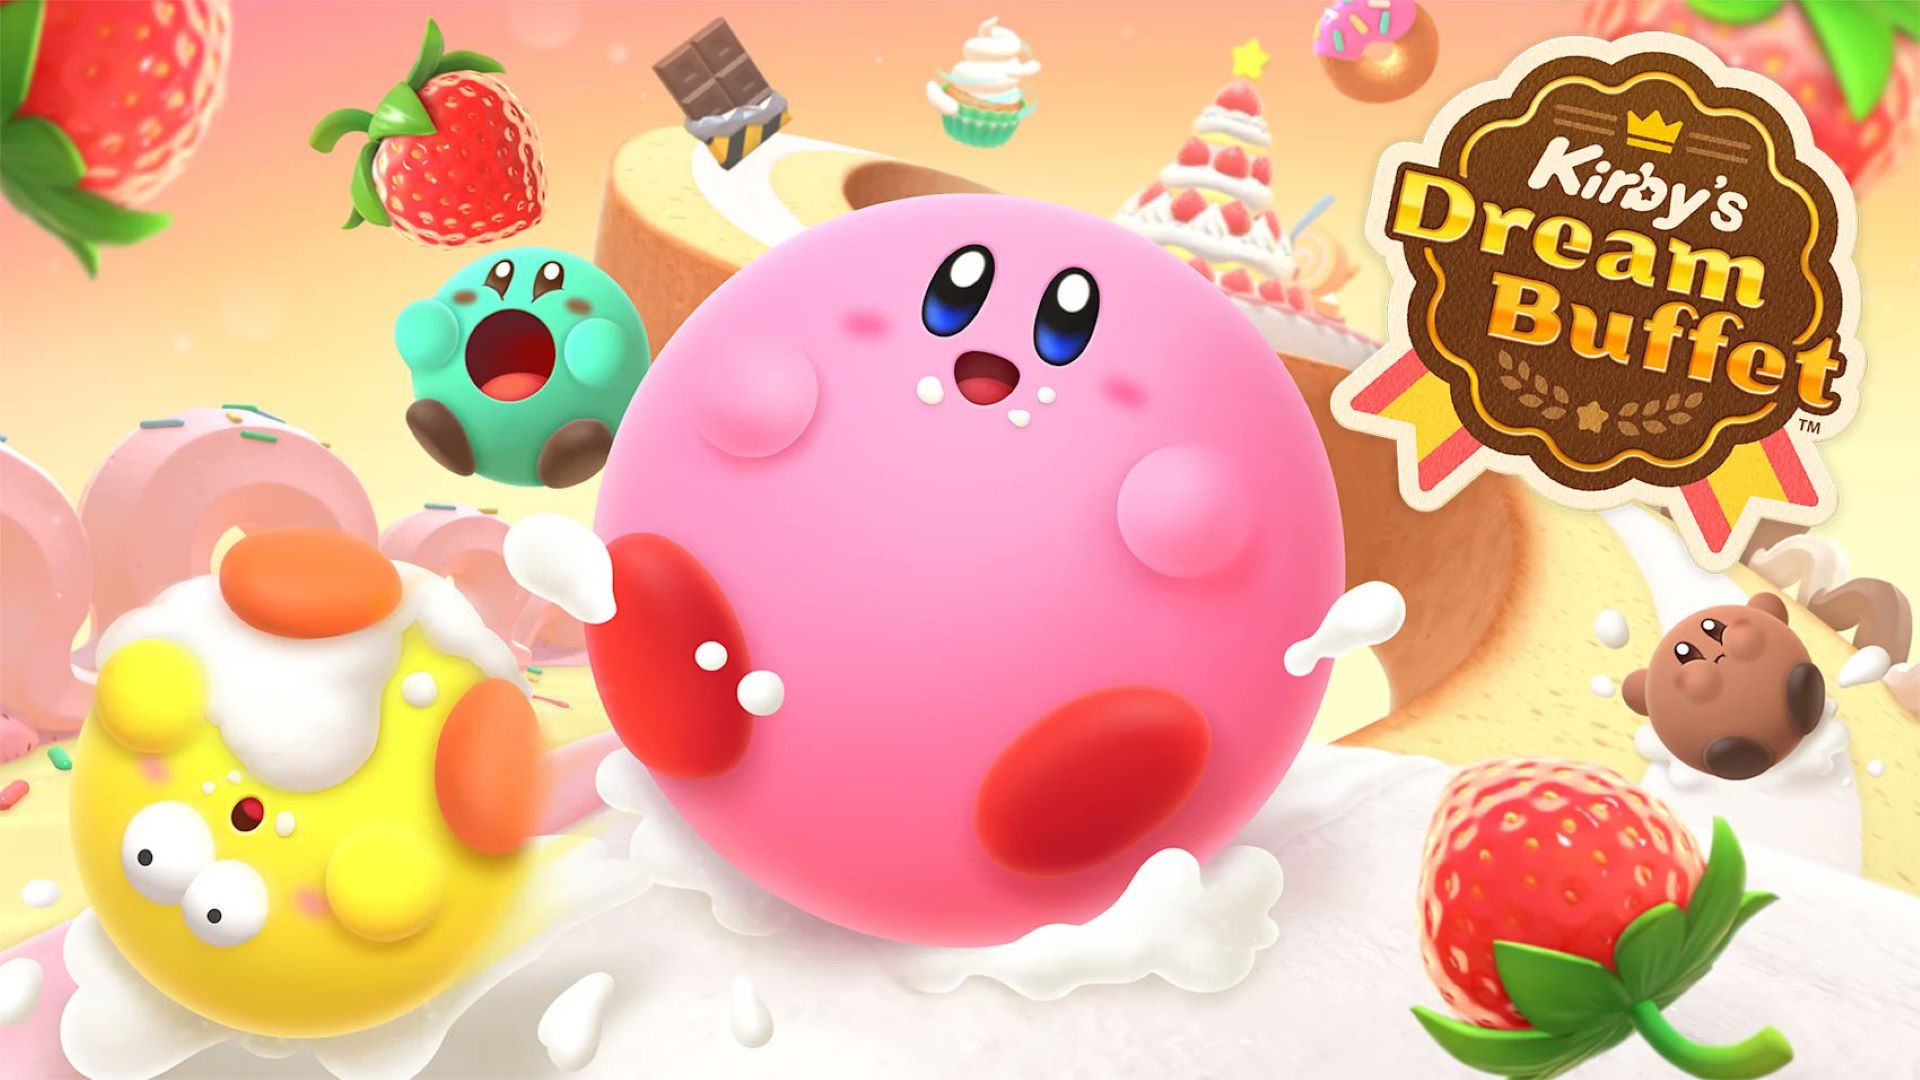 Kirby's Dream Buffet is a new competitive eating game coming this Summer